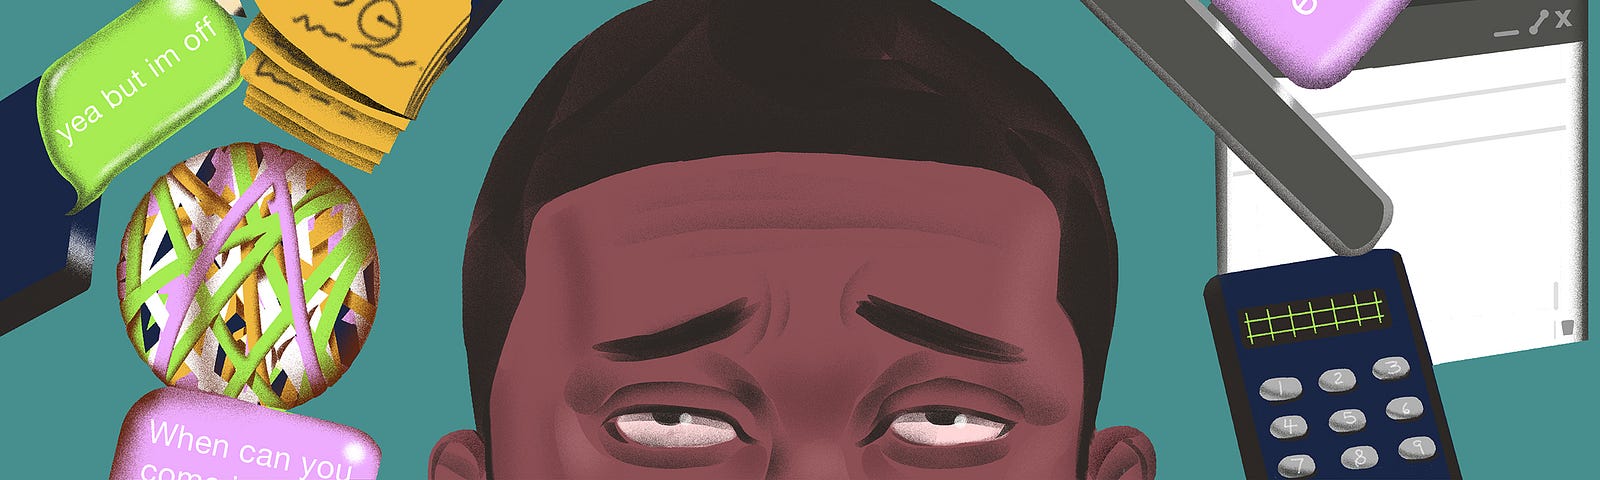 Illustration of an African American man looking up worried, as wor kreminders like emails, texts, and messages surround him.